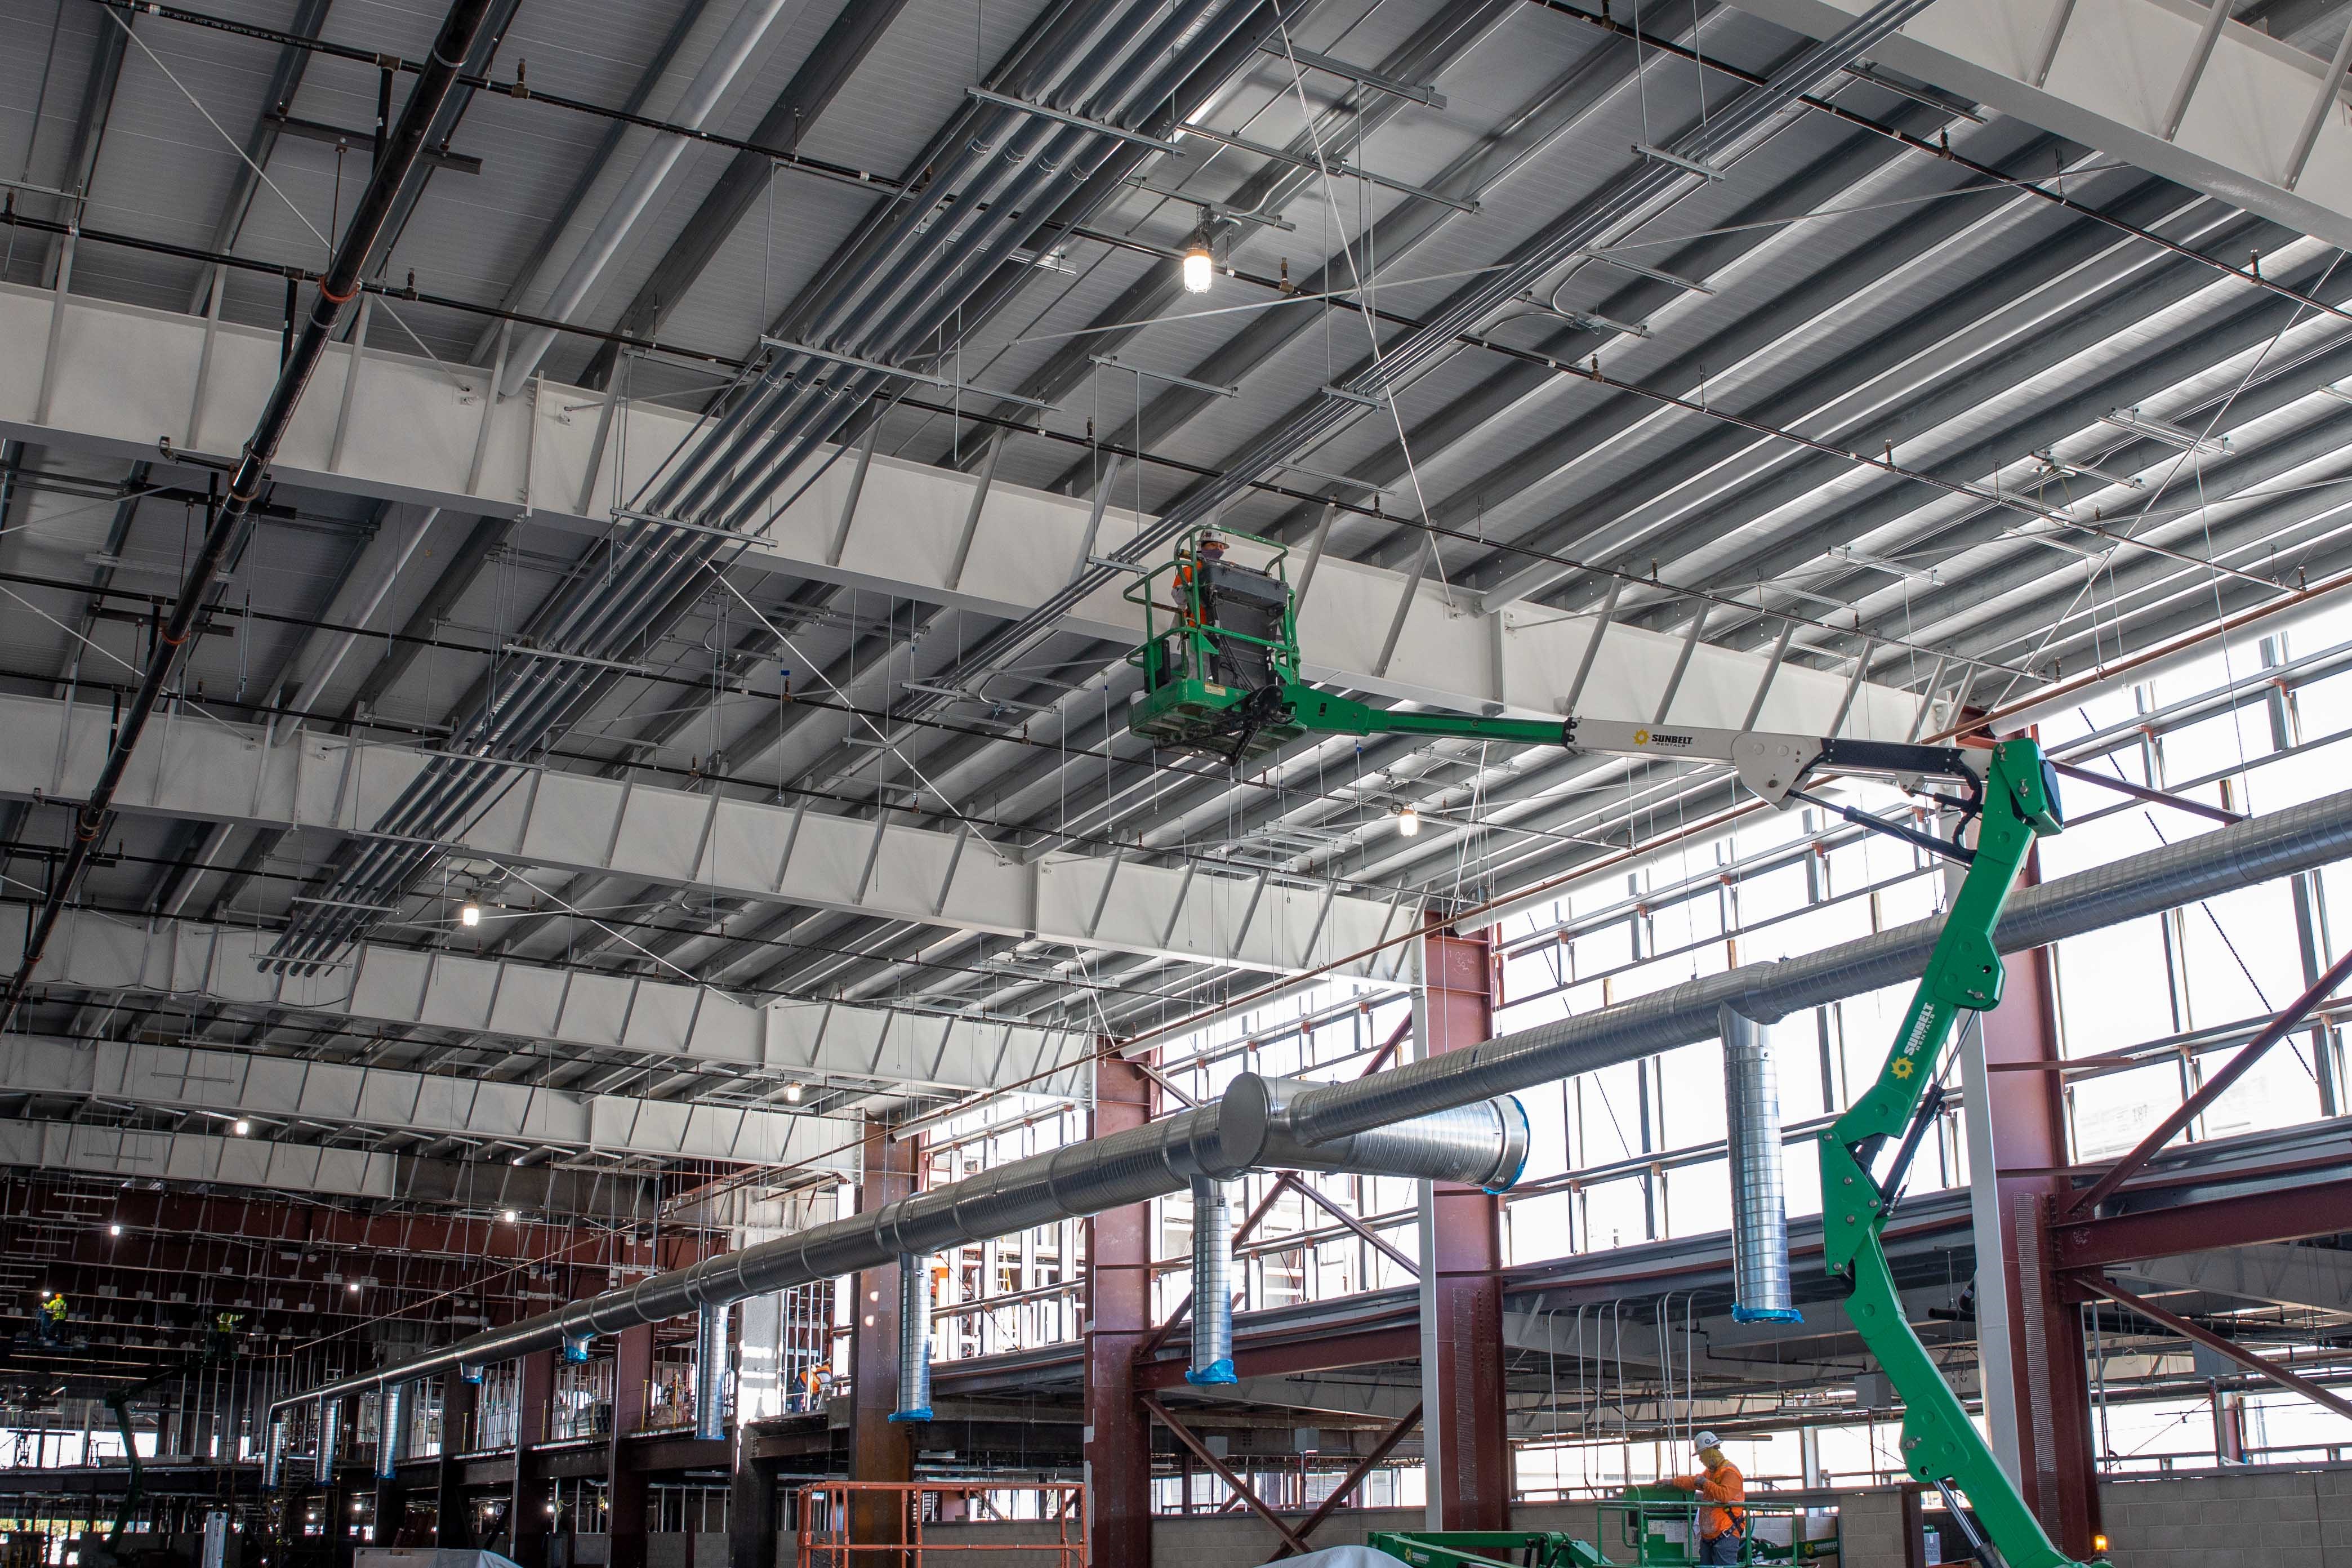 The interior buildout of the future Maintenance Storage Facility continues with ductwork.